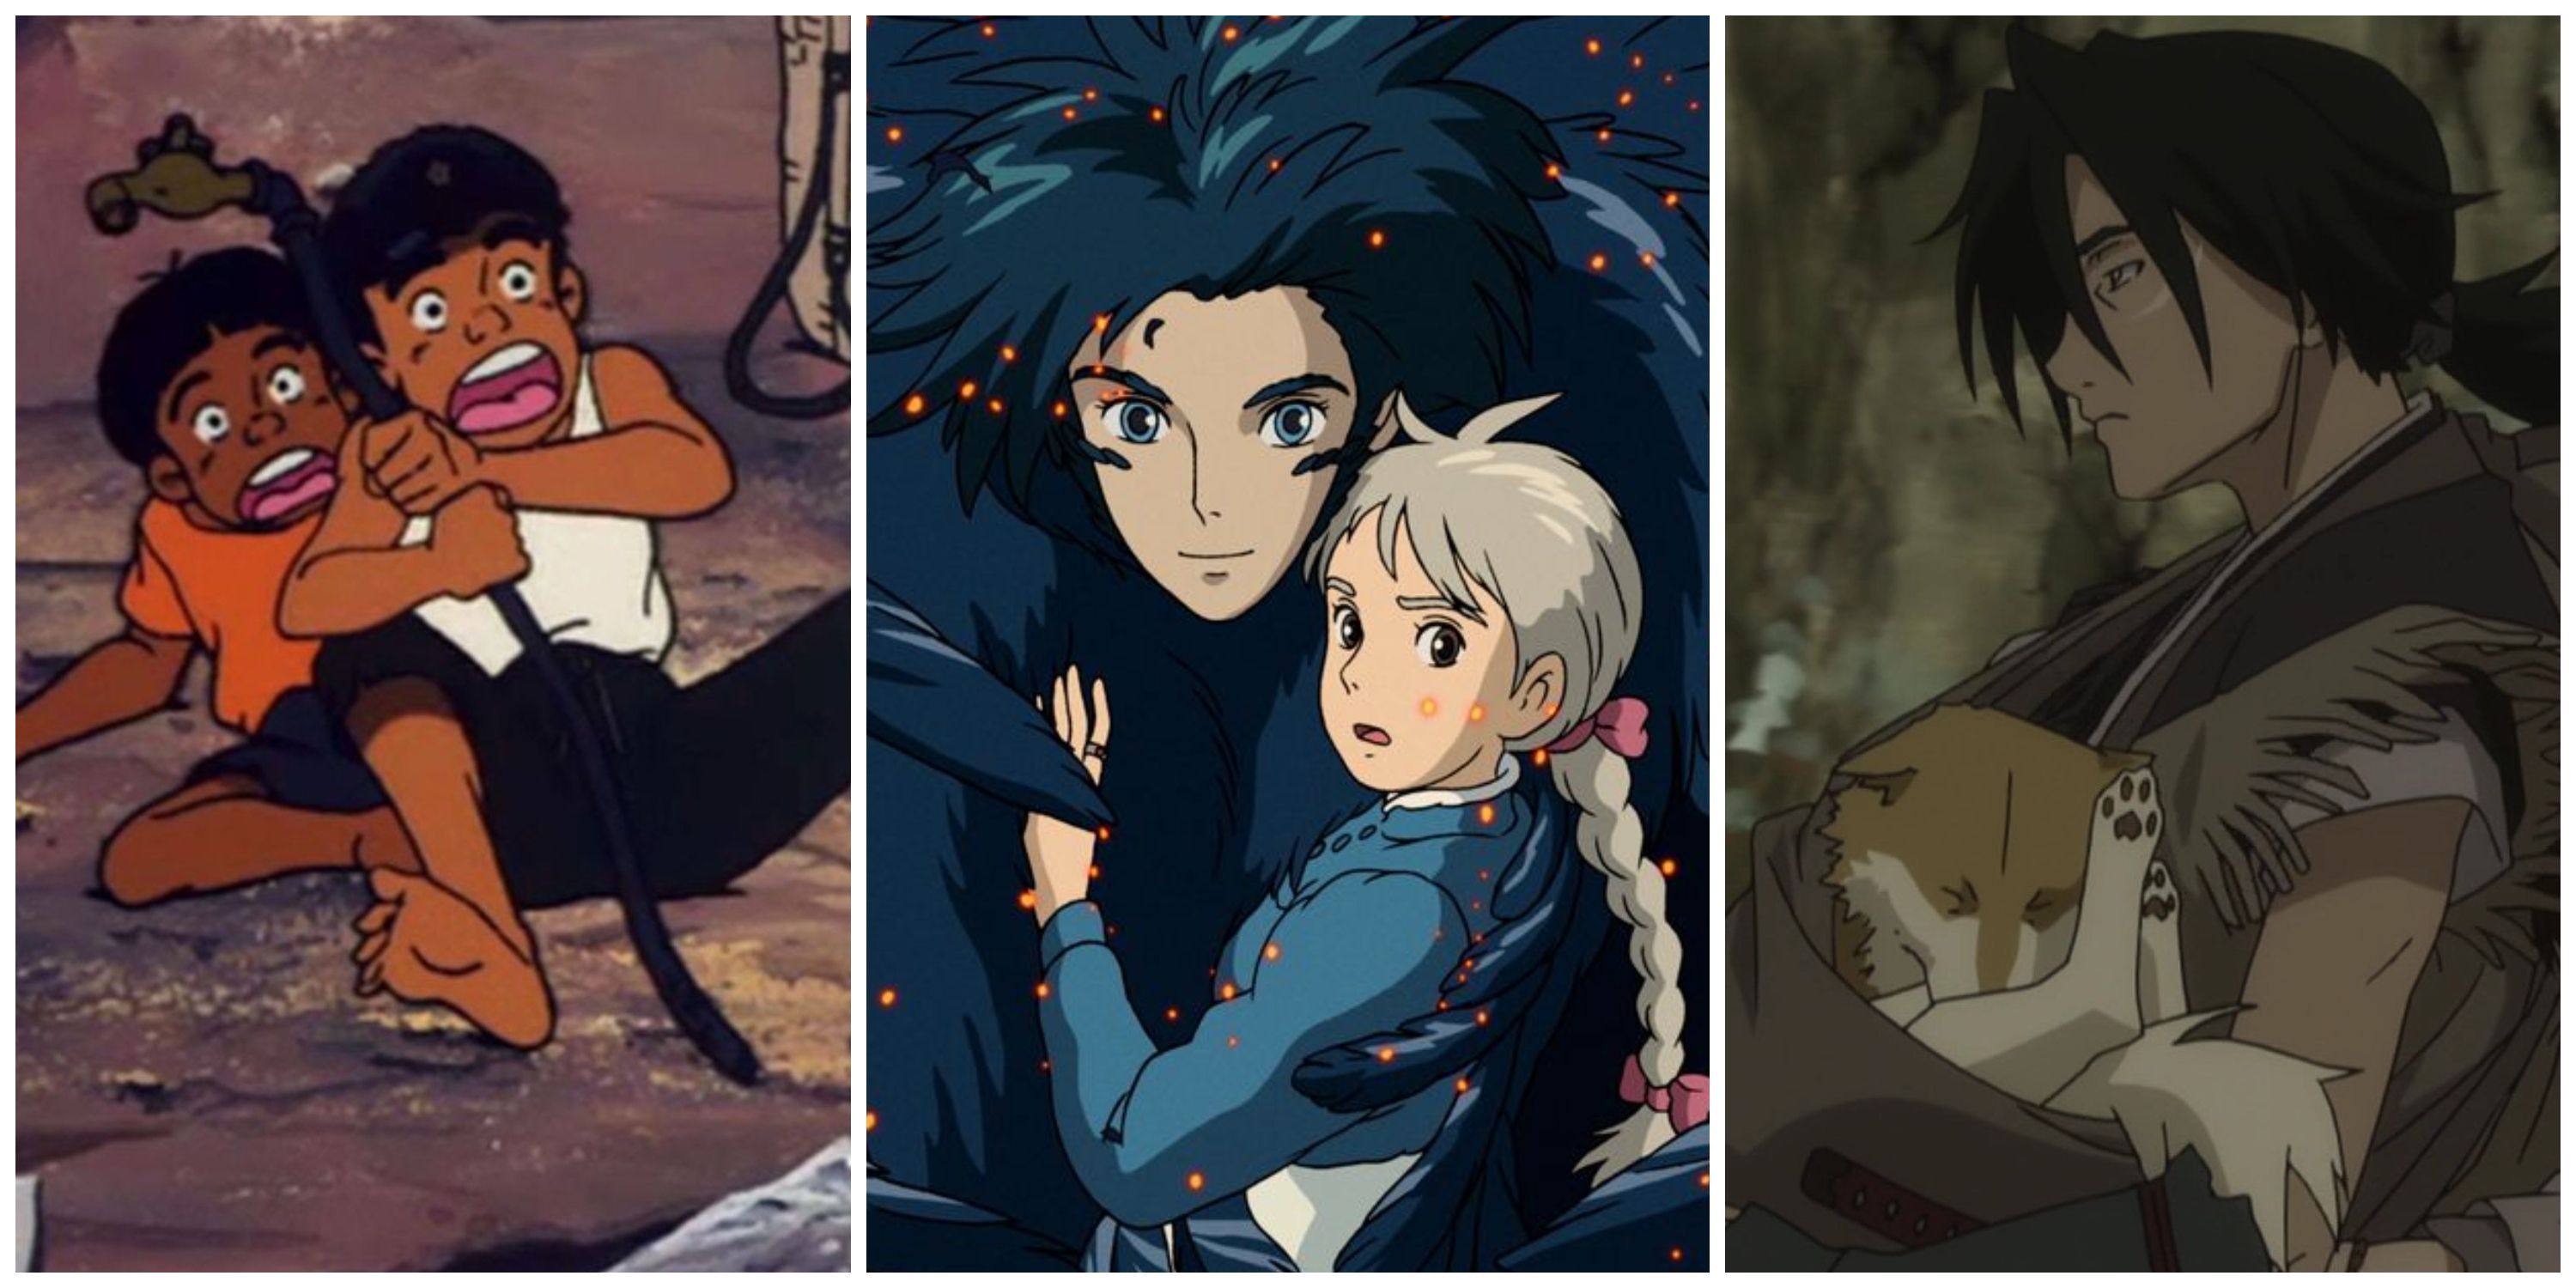 Two characters cowering in fear in Barefoot Gen 2, Howl holding Sophin in Howl's Moving Castle, and a character holding a dog in Sword of the Stranger.